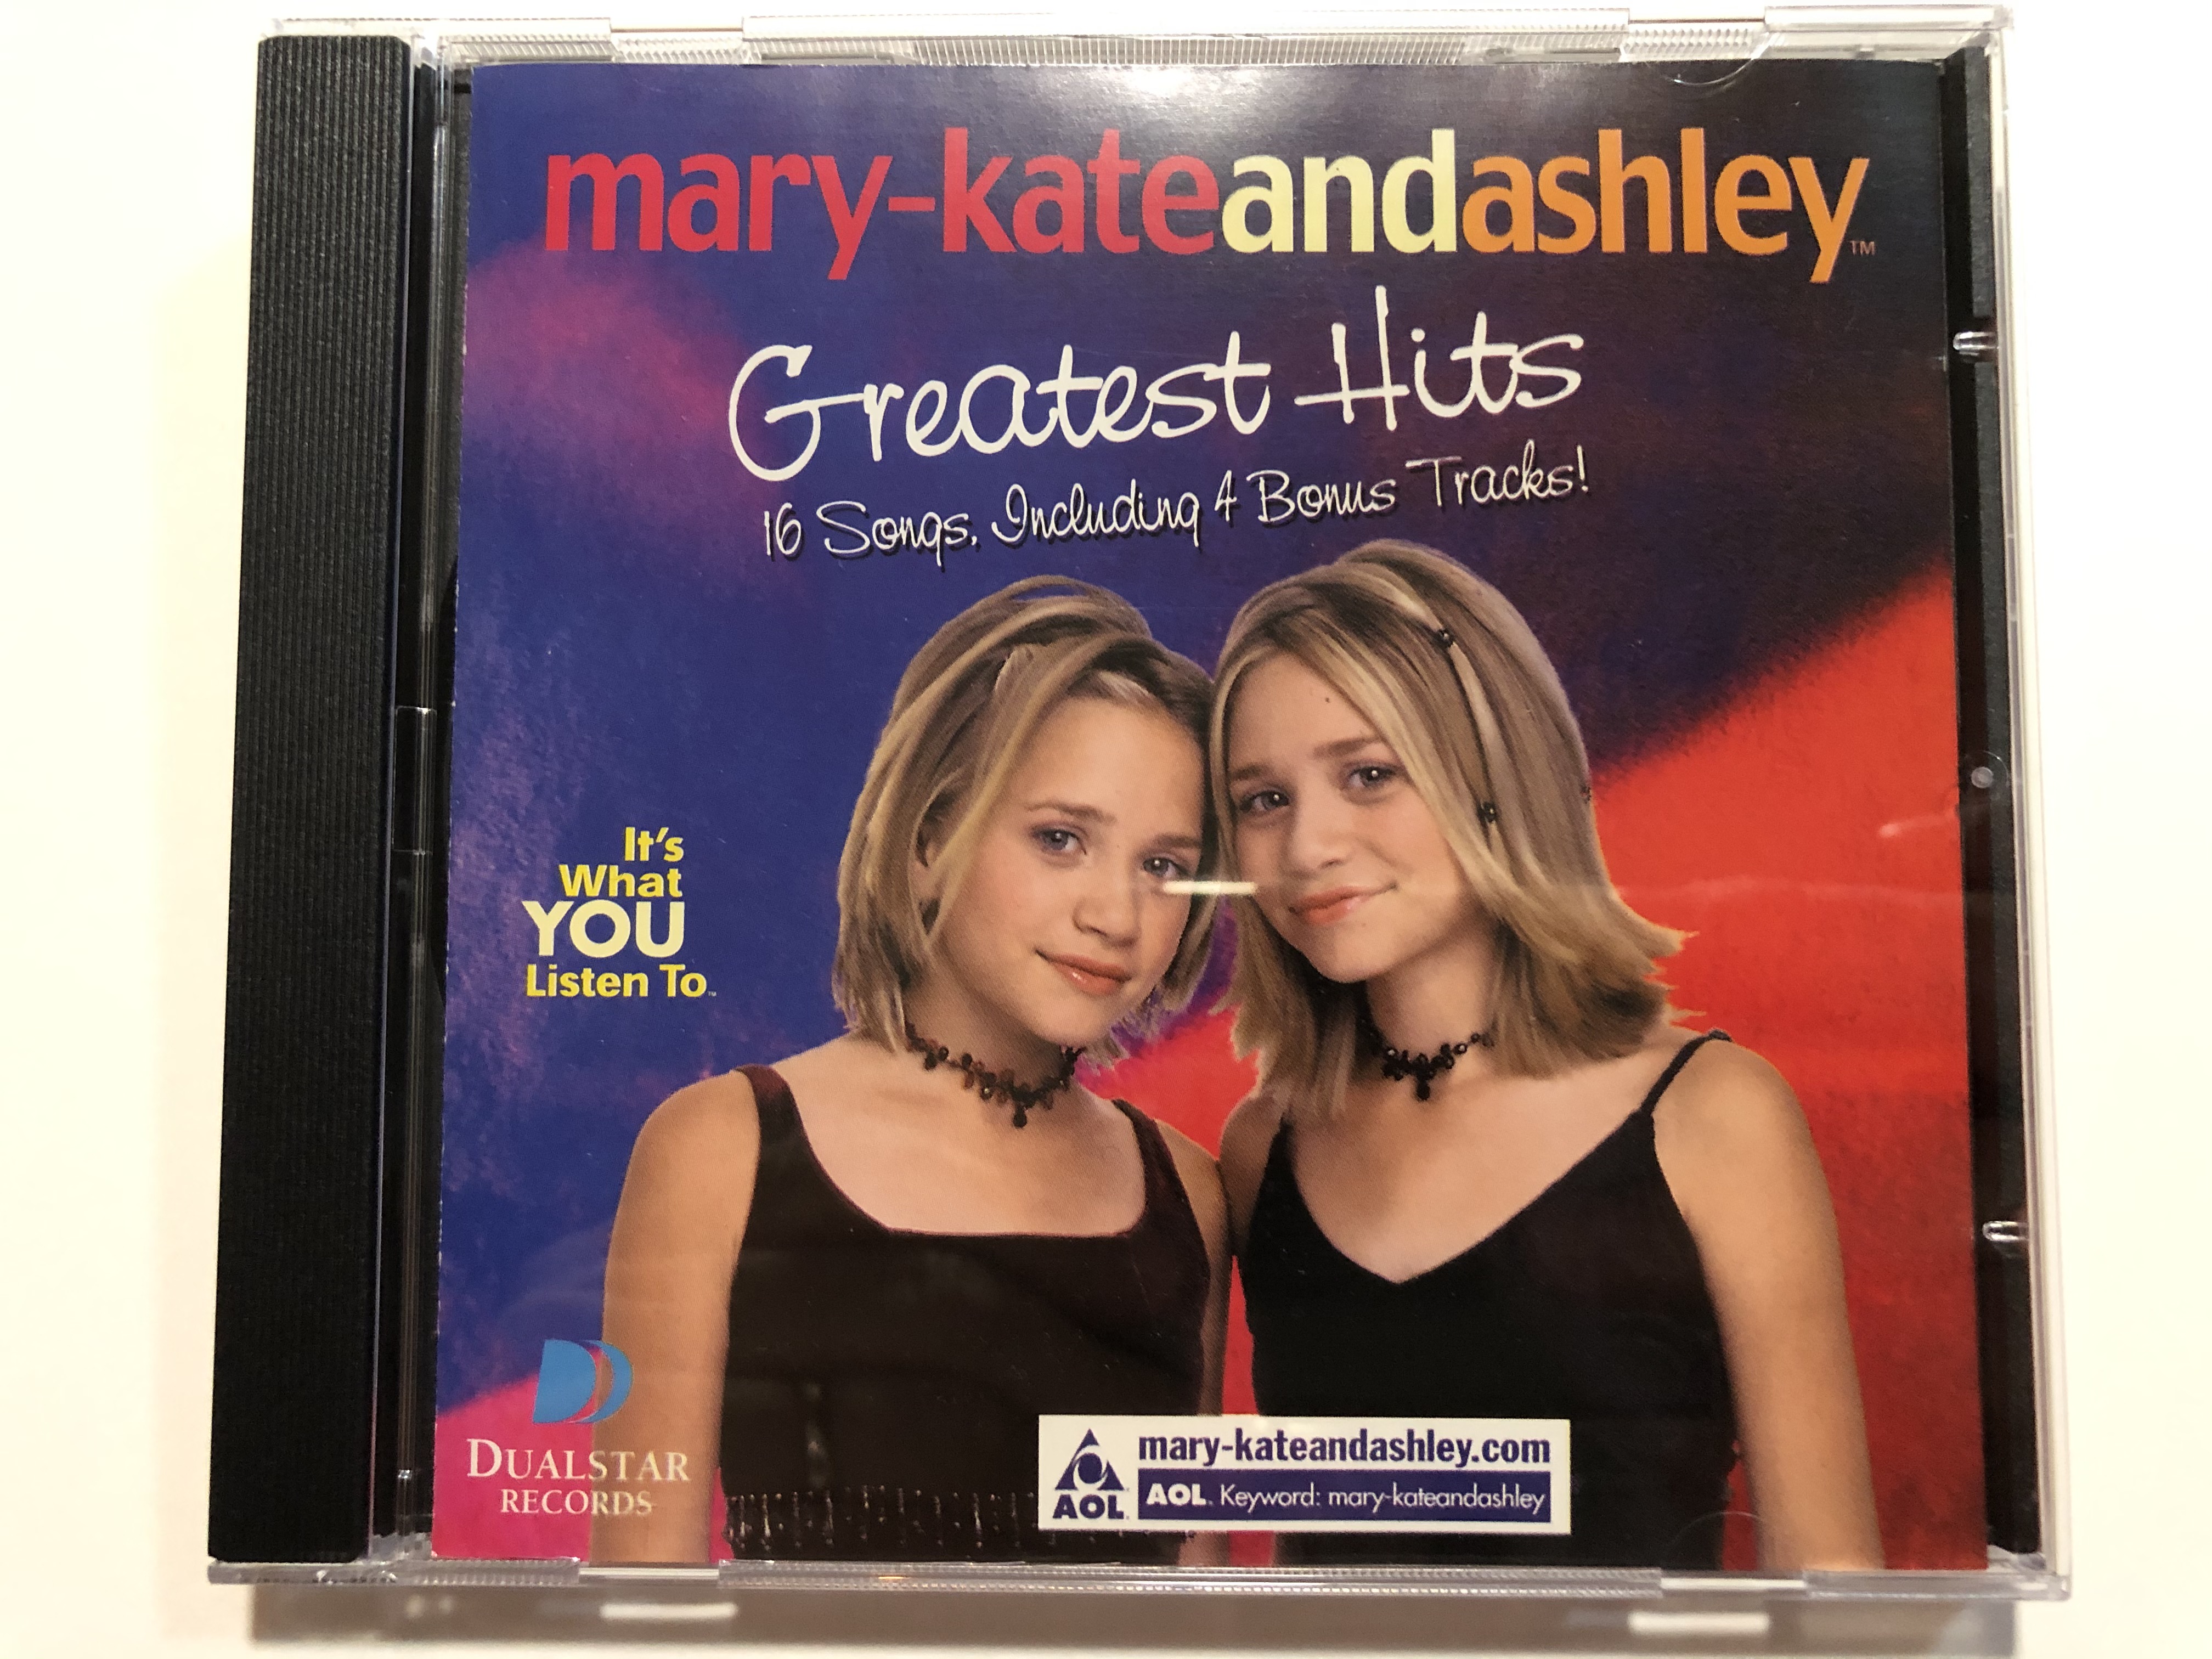 mary-kate-and-ashley-greatest-hits-16-songs-including-4-bonus-tracks-it-s-what-you-listen-to.-dualstar-records-audio-cd-1998-512536-2-1-.jpg